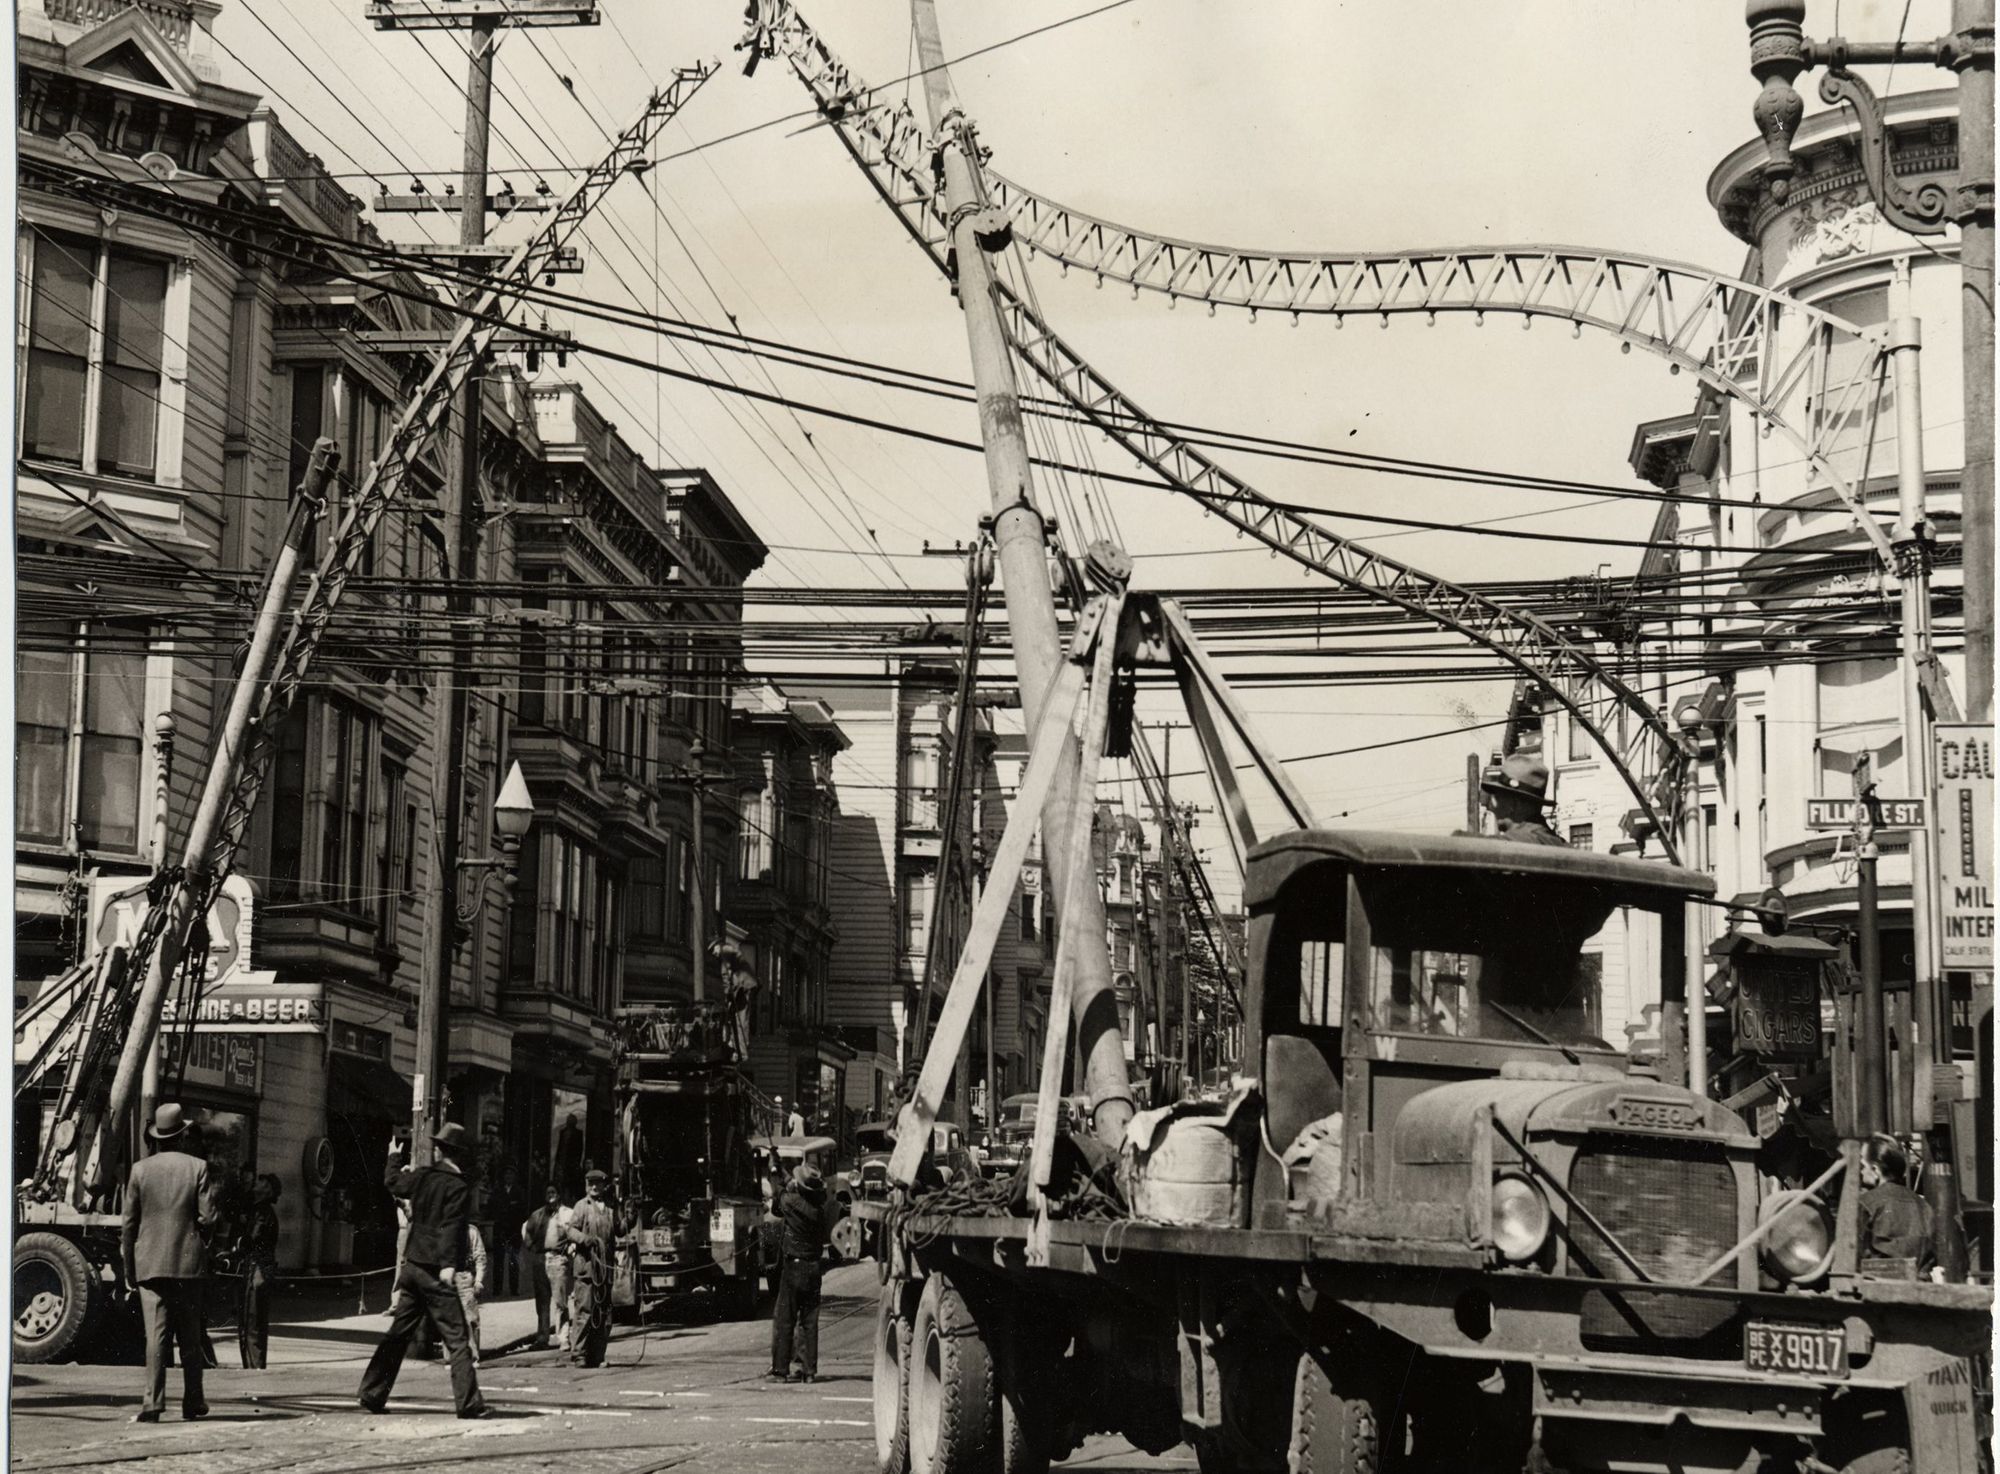 1943 photo of Fillmore Street arches being dismantled